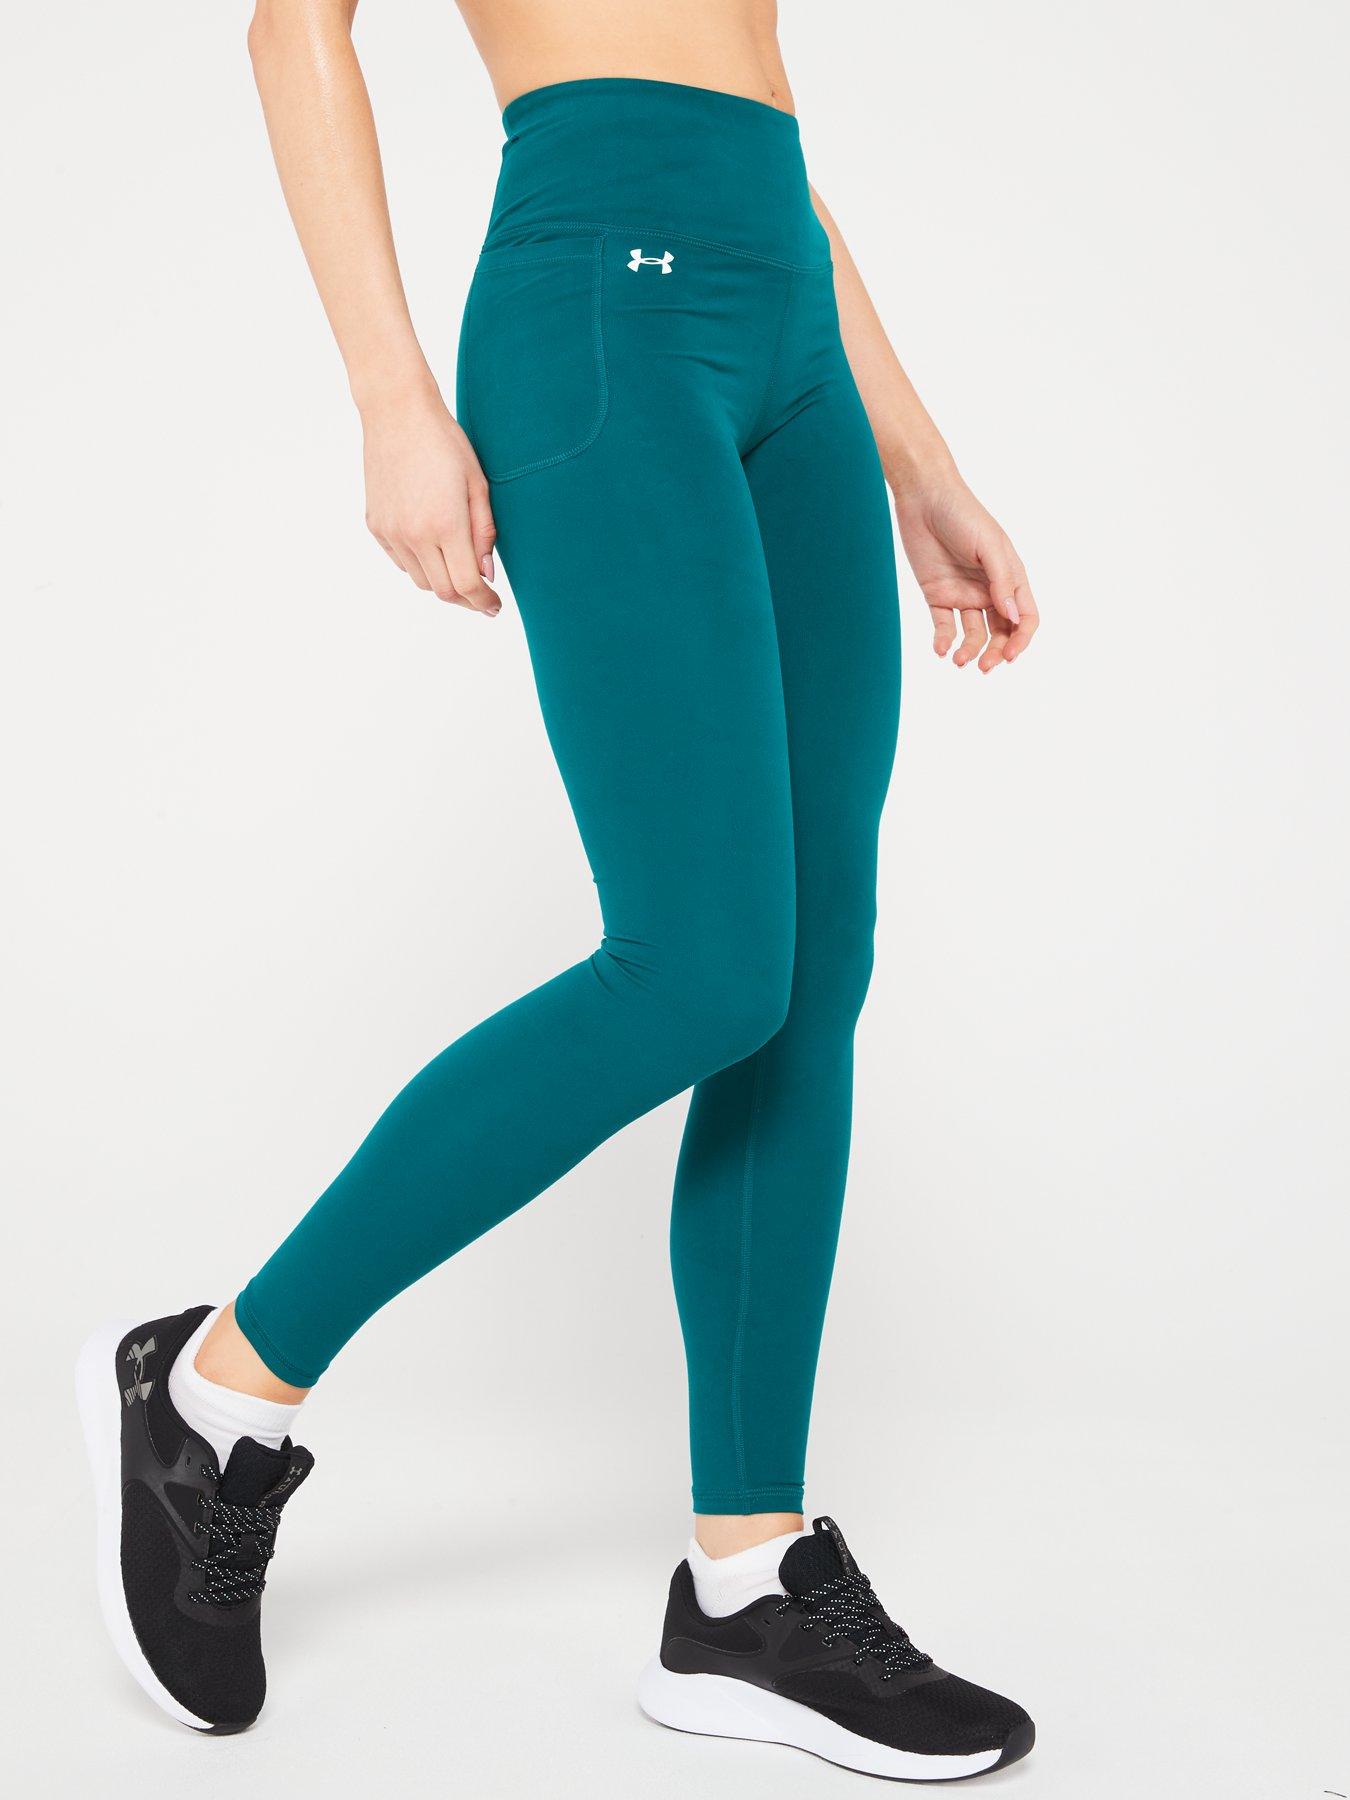 Under Armour Leggings - Armor - Hydro Teal » Quick Shipping